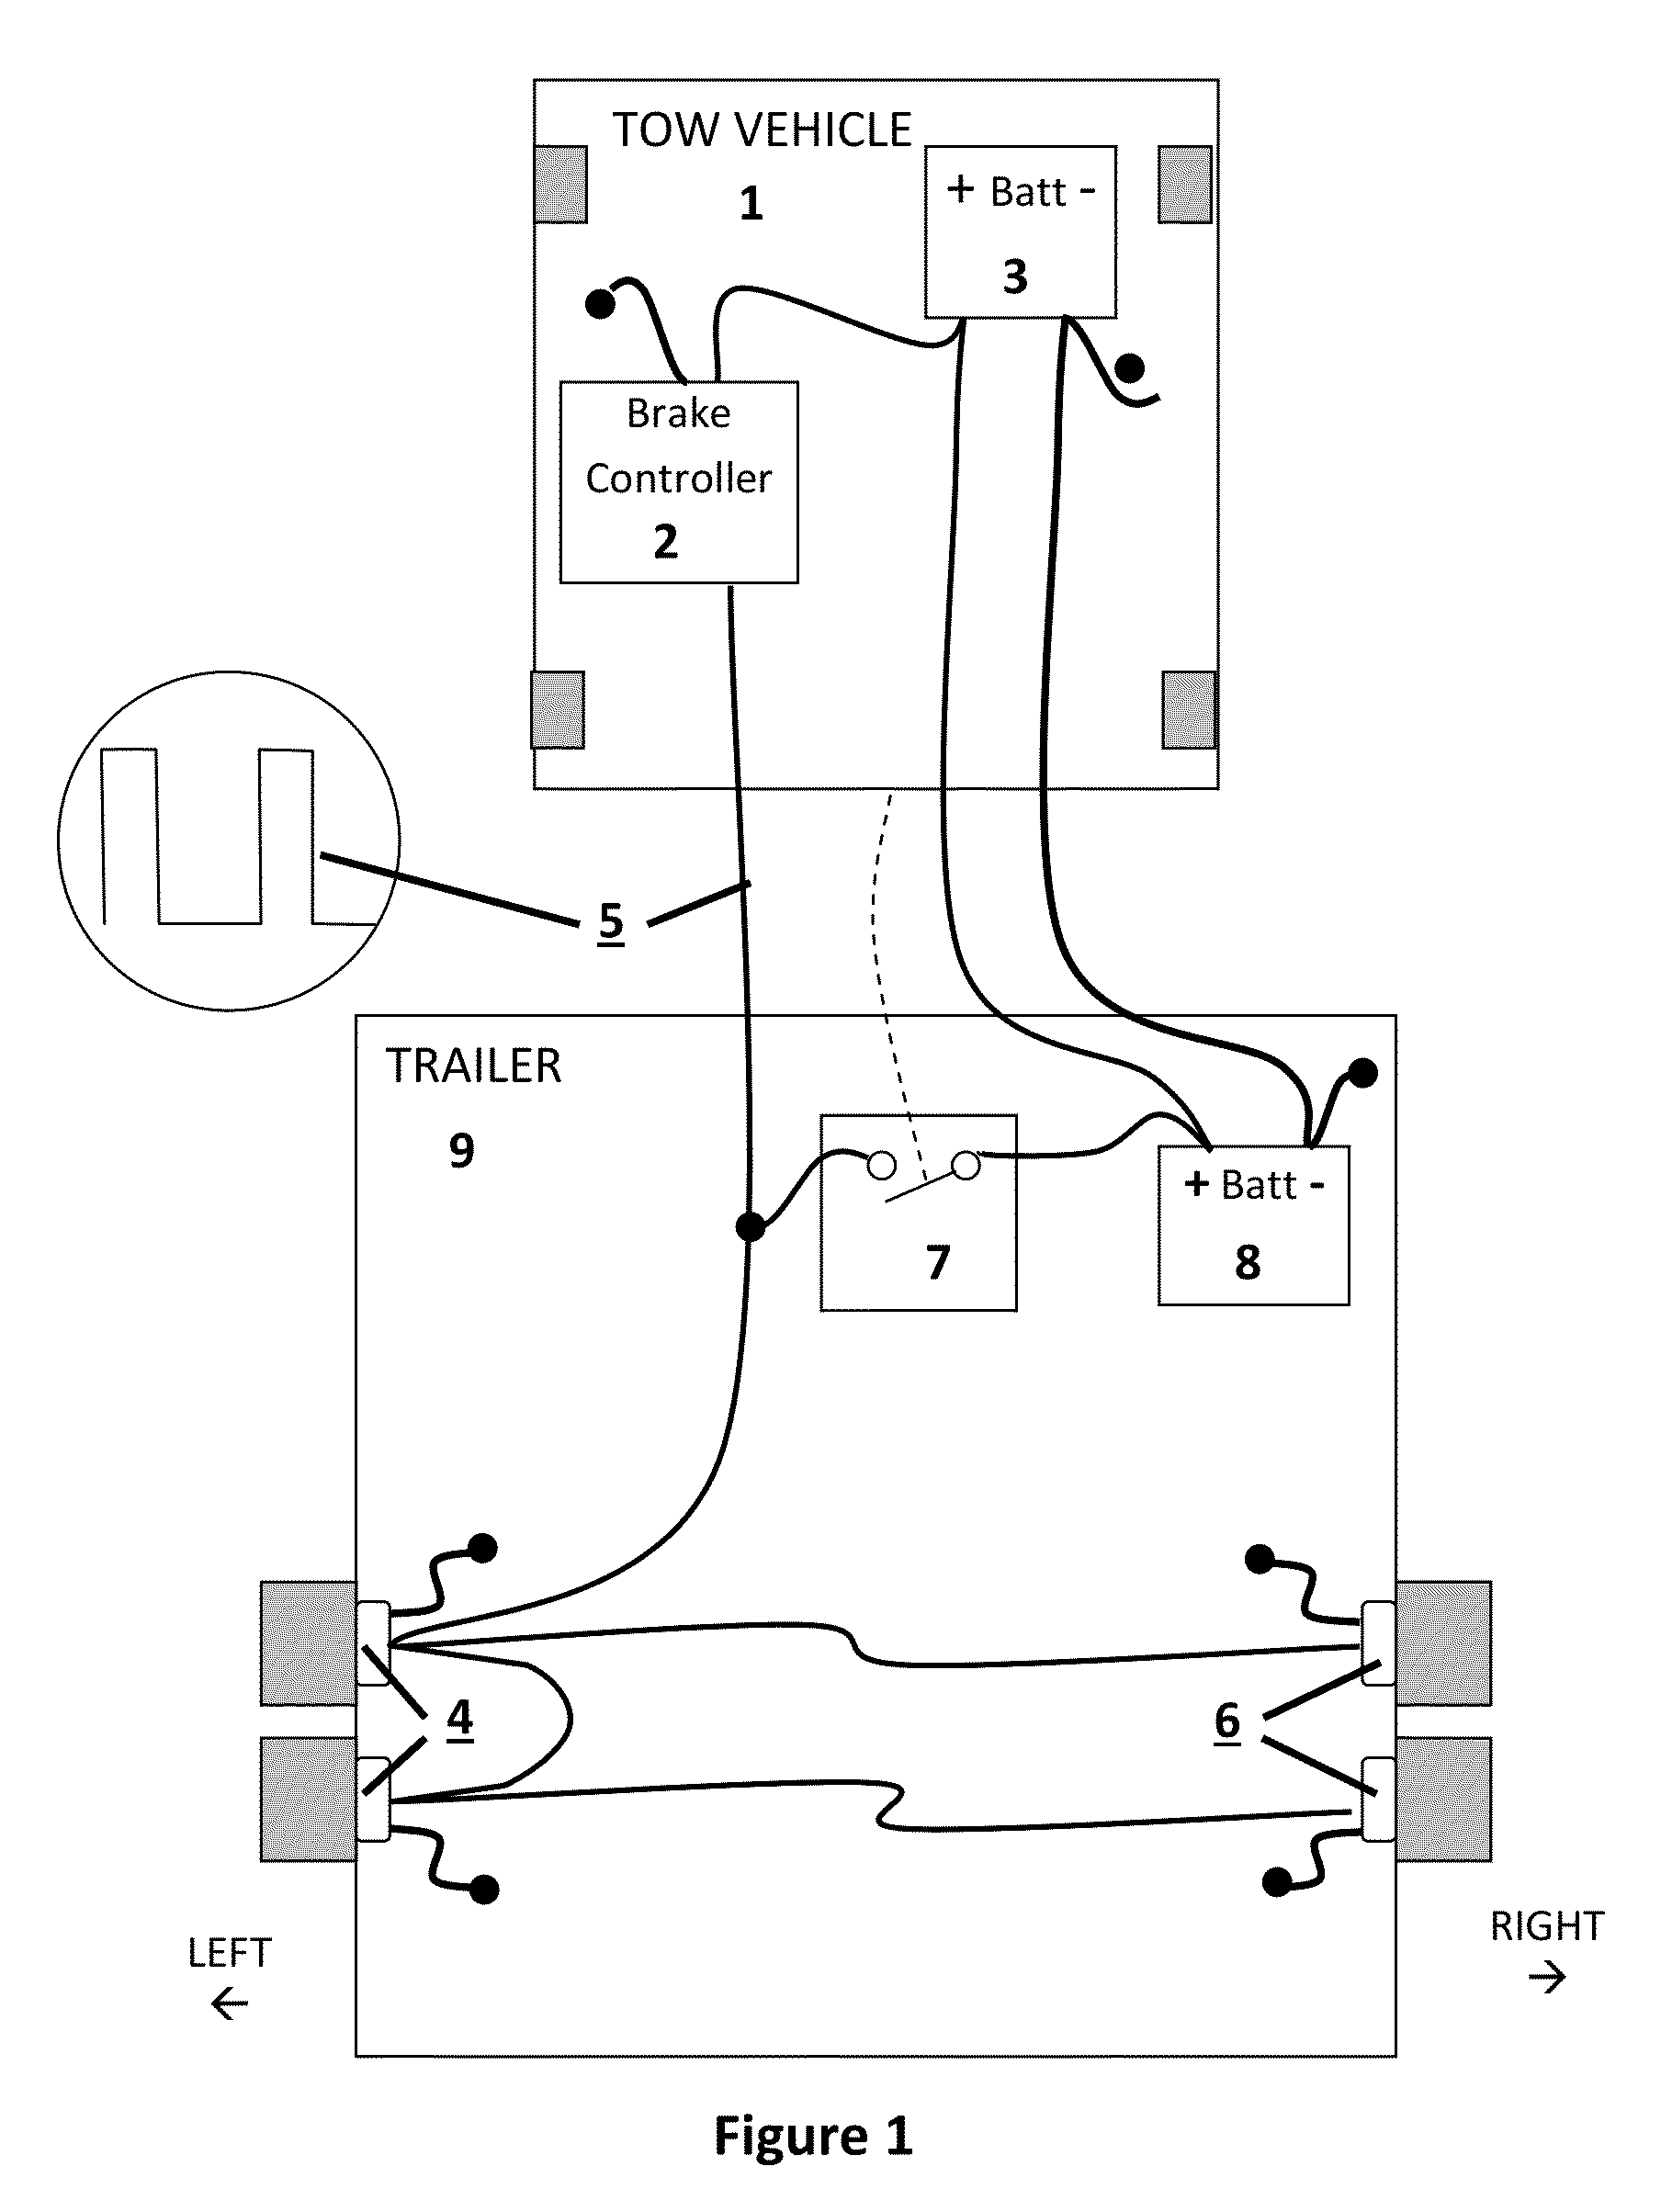 Trailer sway detection and method for reducing trailer sway utilizing trailer brakes